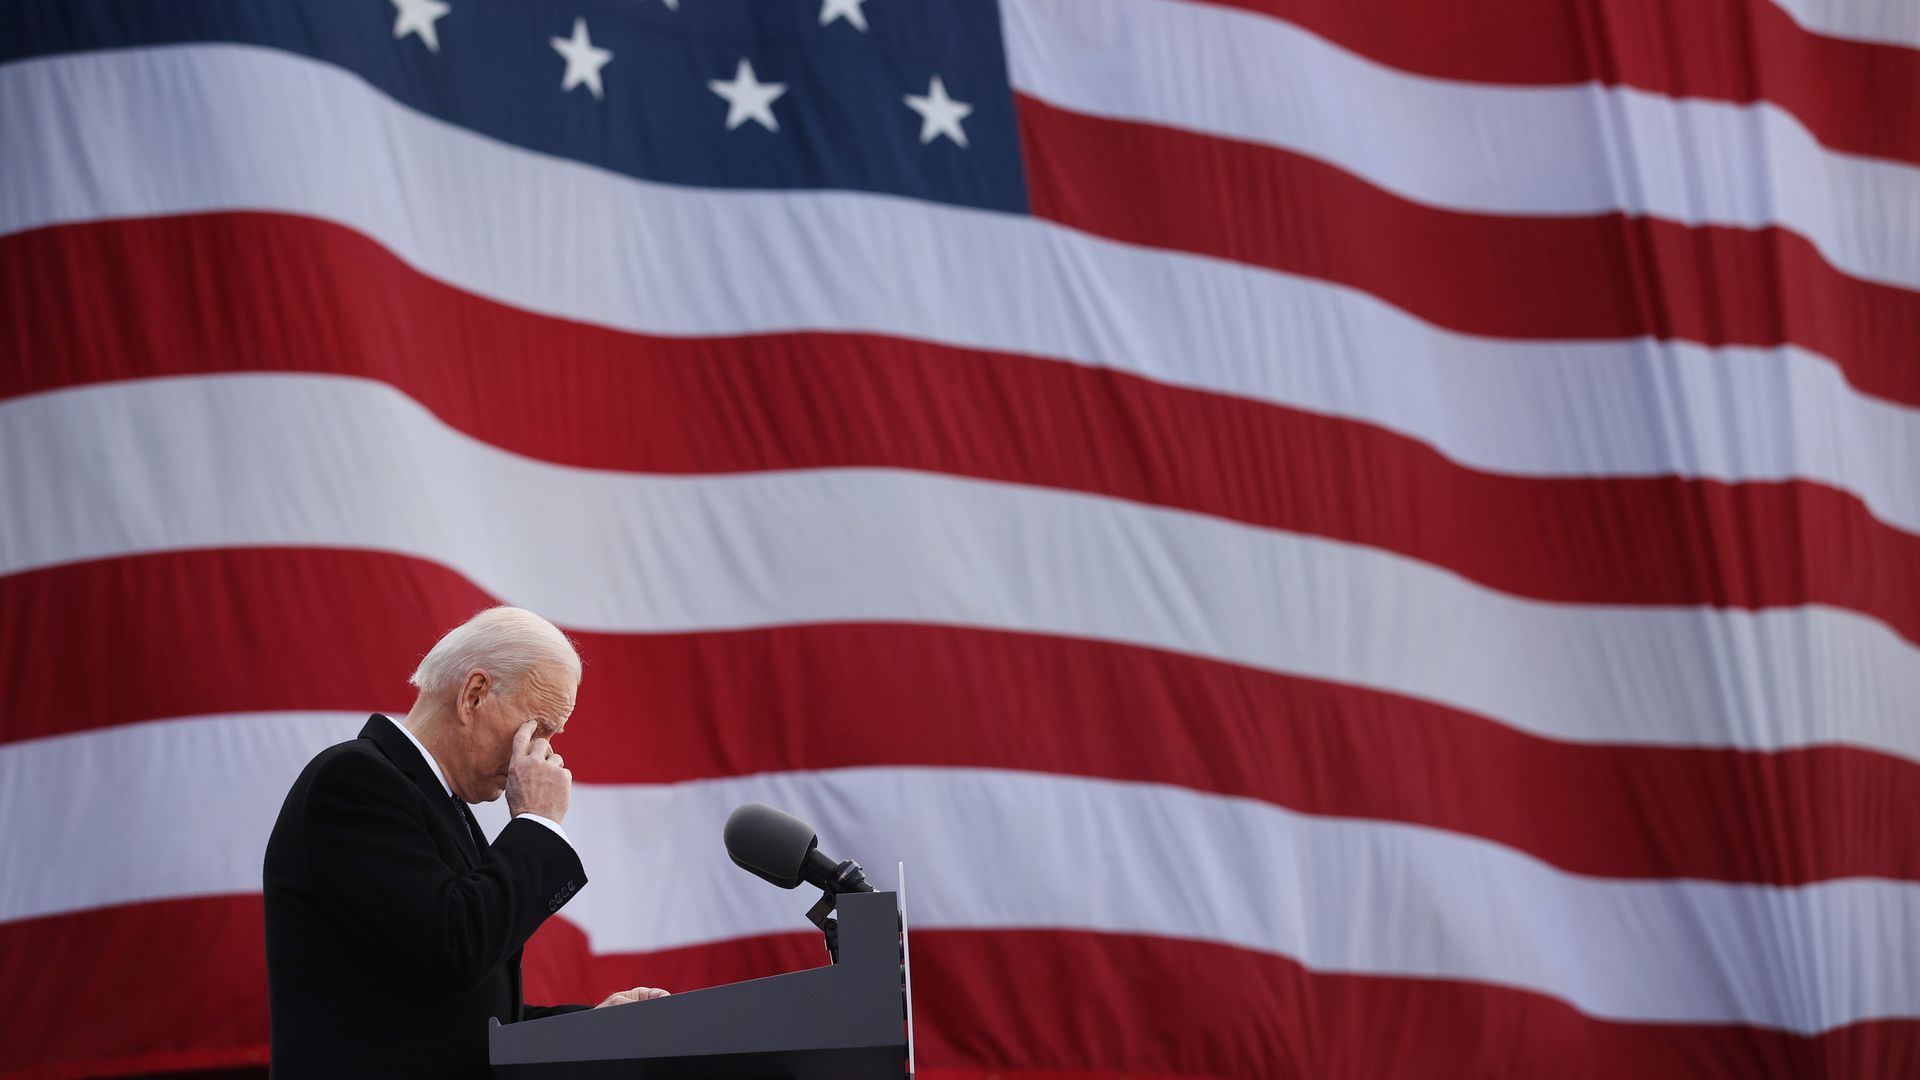 Joe Biden is seen wiping away a tear as he delivers farewell remarks to his home state of Delaware.